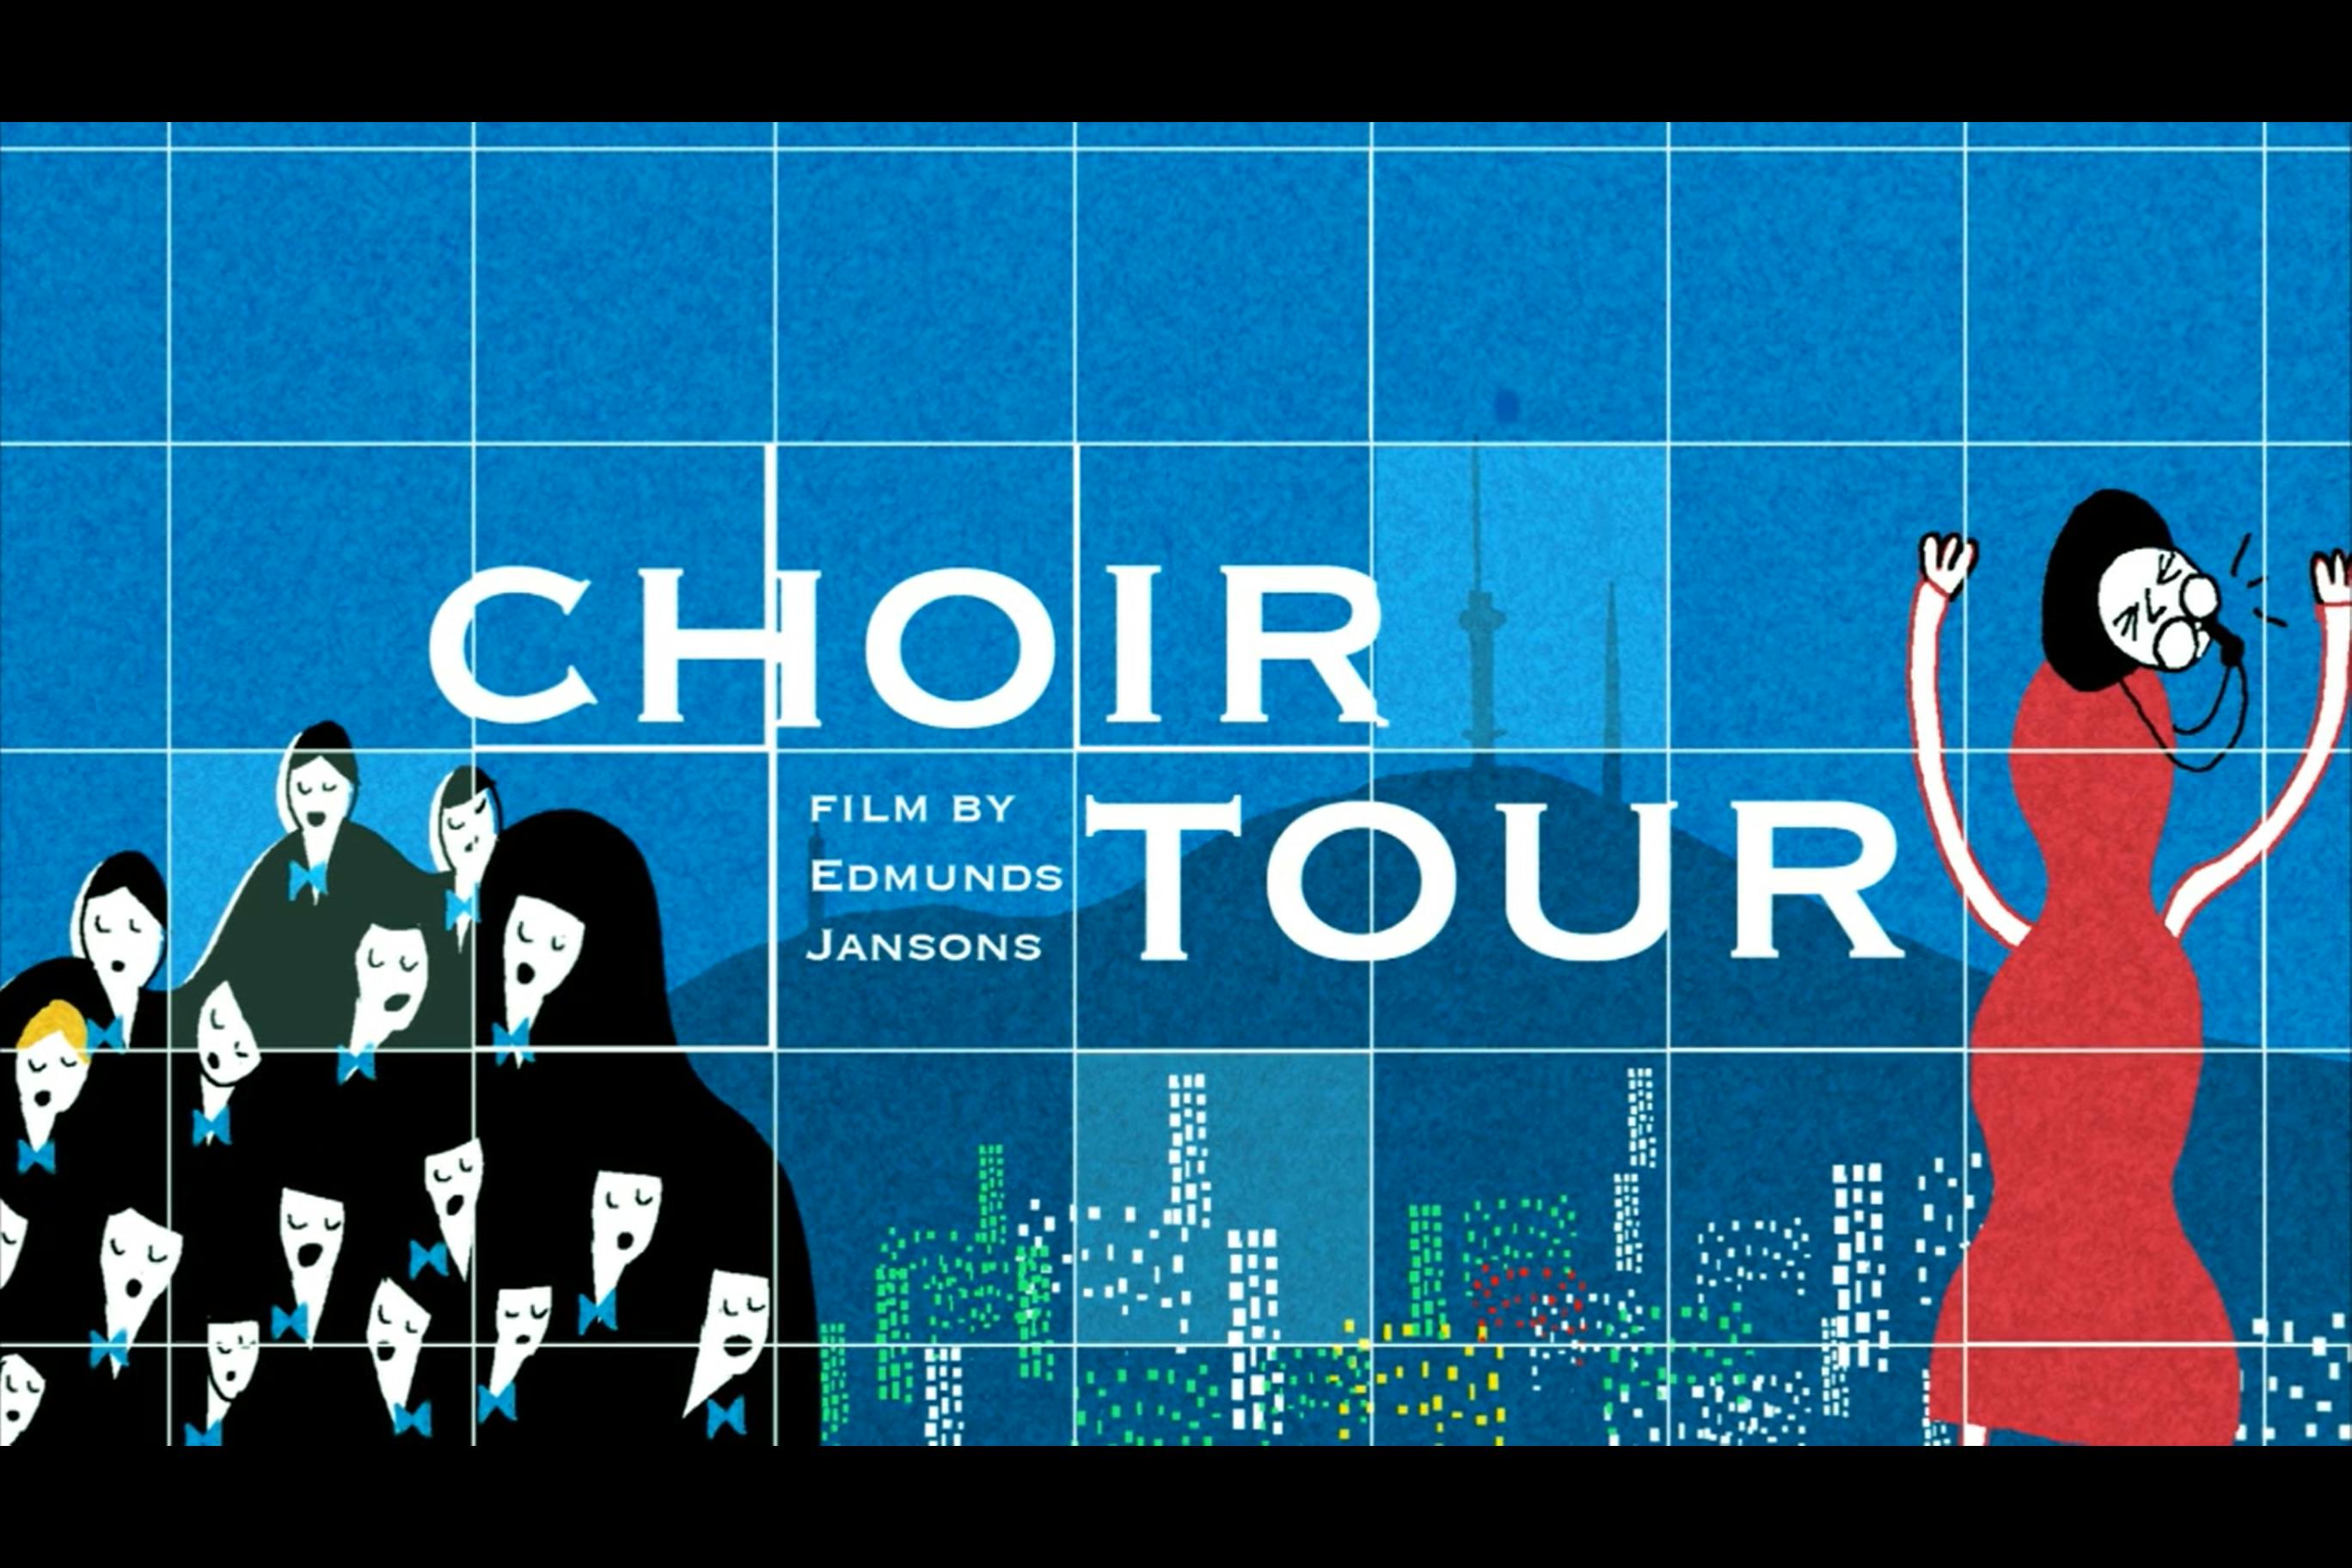 image reads "CHOIR TOUR, film by edmunds jansons". The background is blue with a skiline of a city. There's a woman character on the right, wearing a red dress, with her hands up and blowing a whistle. On the left are 17 choir boys, all eyes closed and with their mouths open. Thye're all wearing black with blue bow ties. The top of the image is coverd in a light blue grid